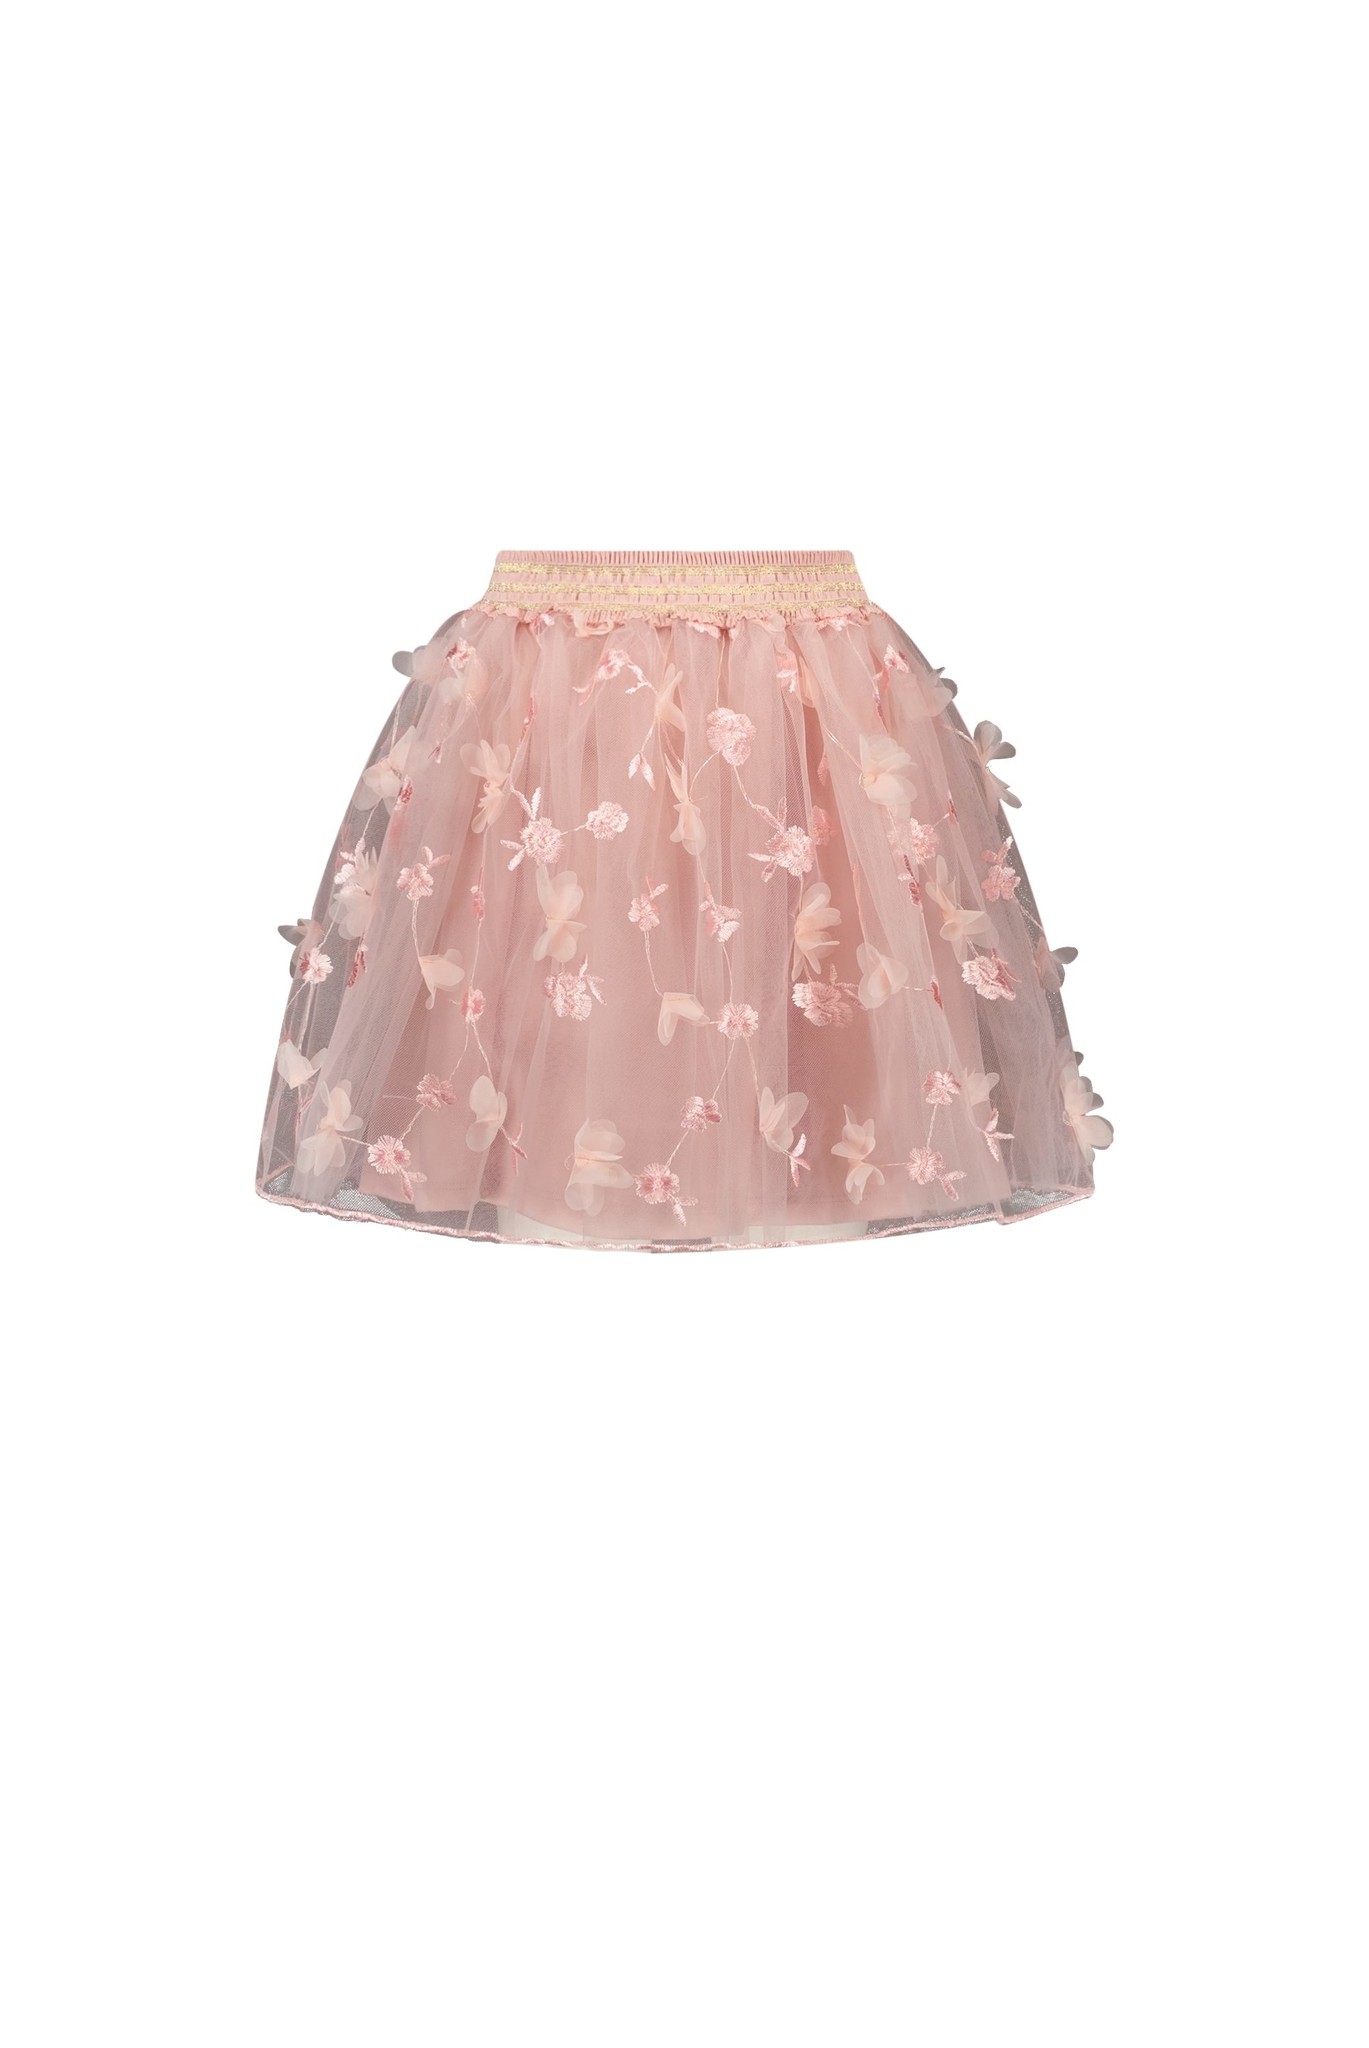 Taylor Tulle Skirt - Sweets for My Sweet